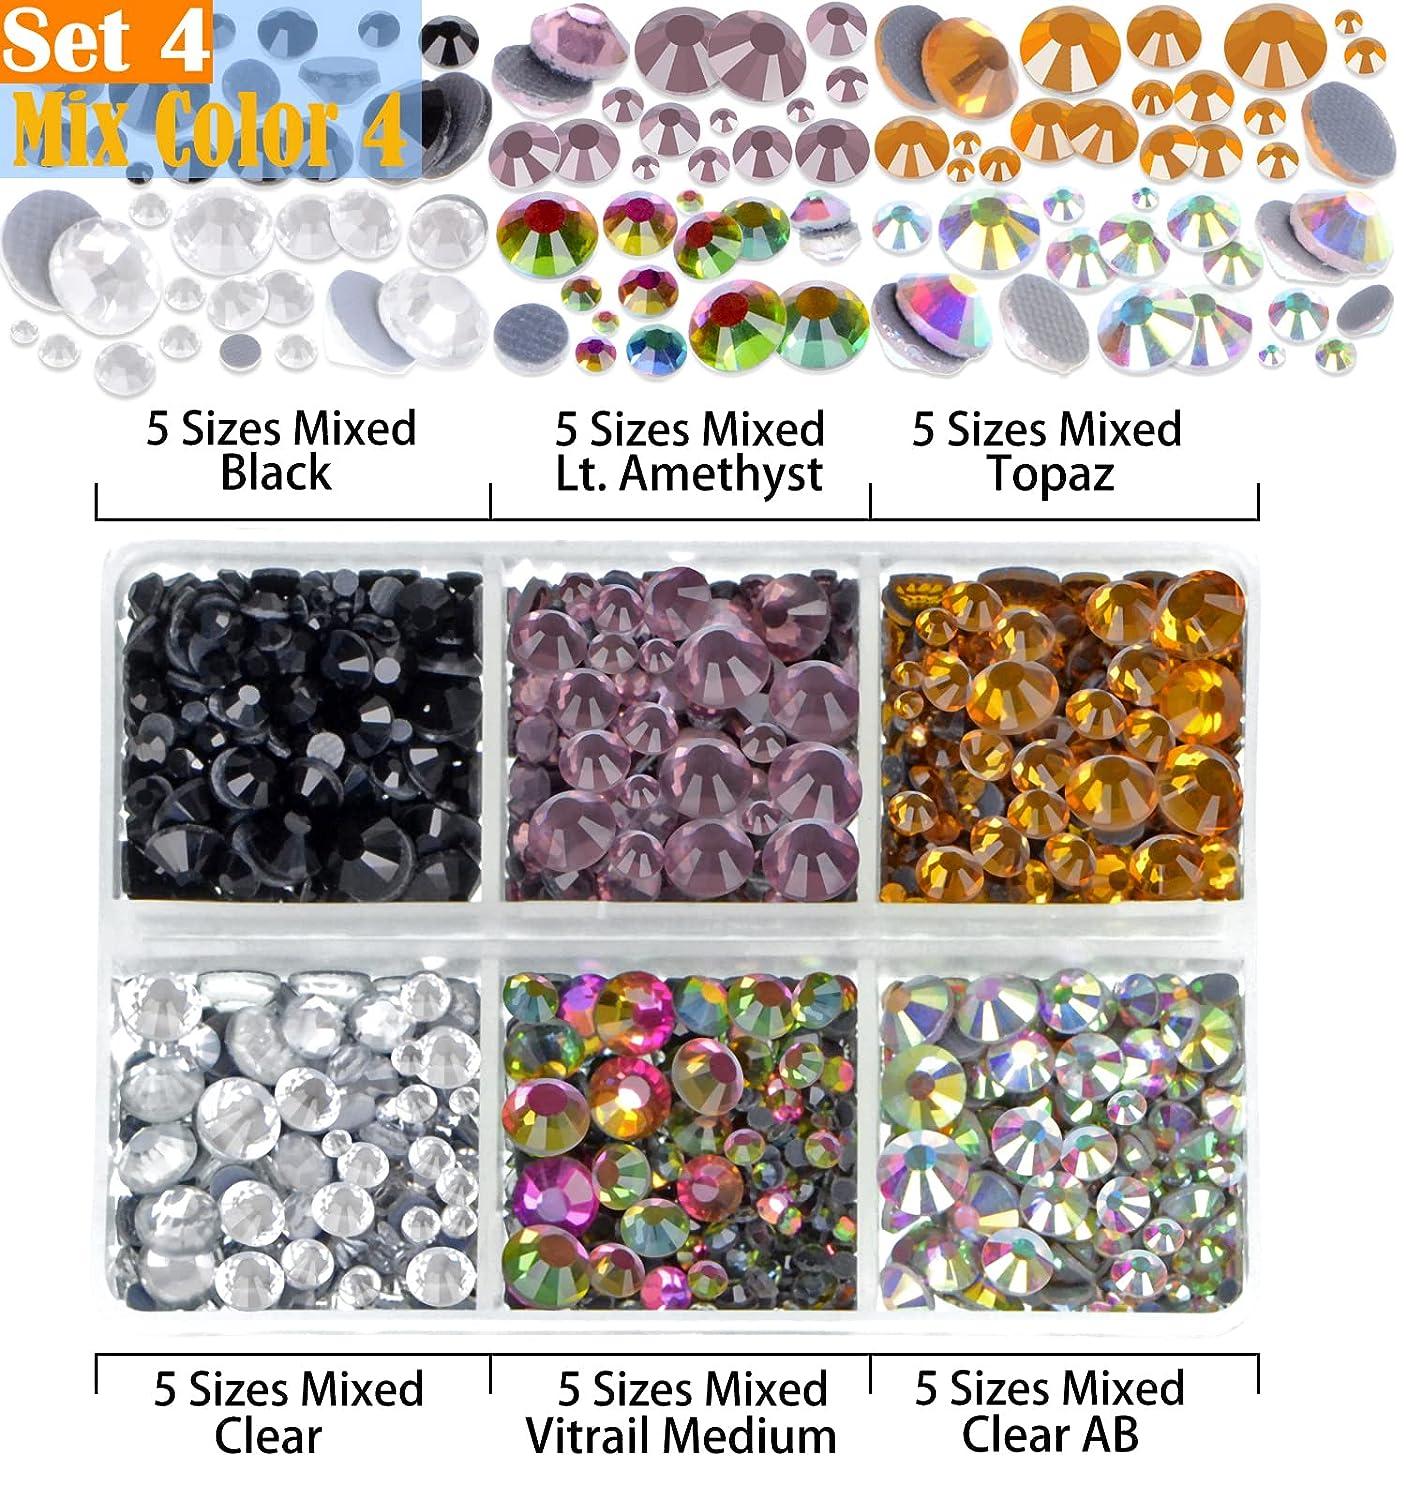 Hot Fix Korean Rhinestones - Size SS10 - By the Ounce